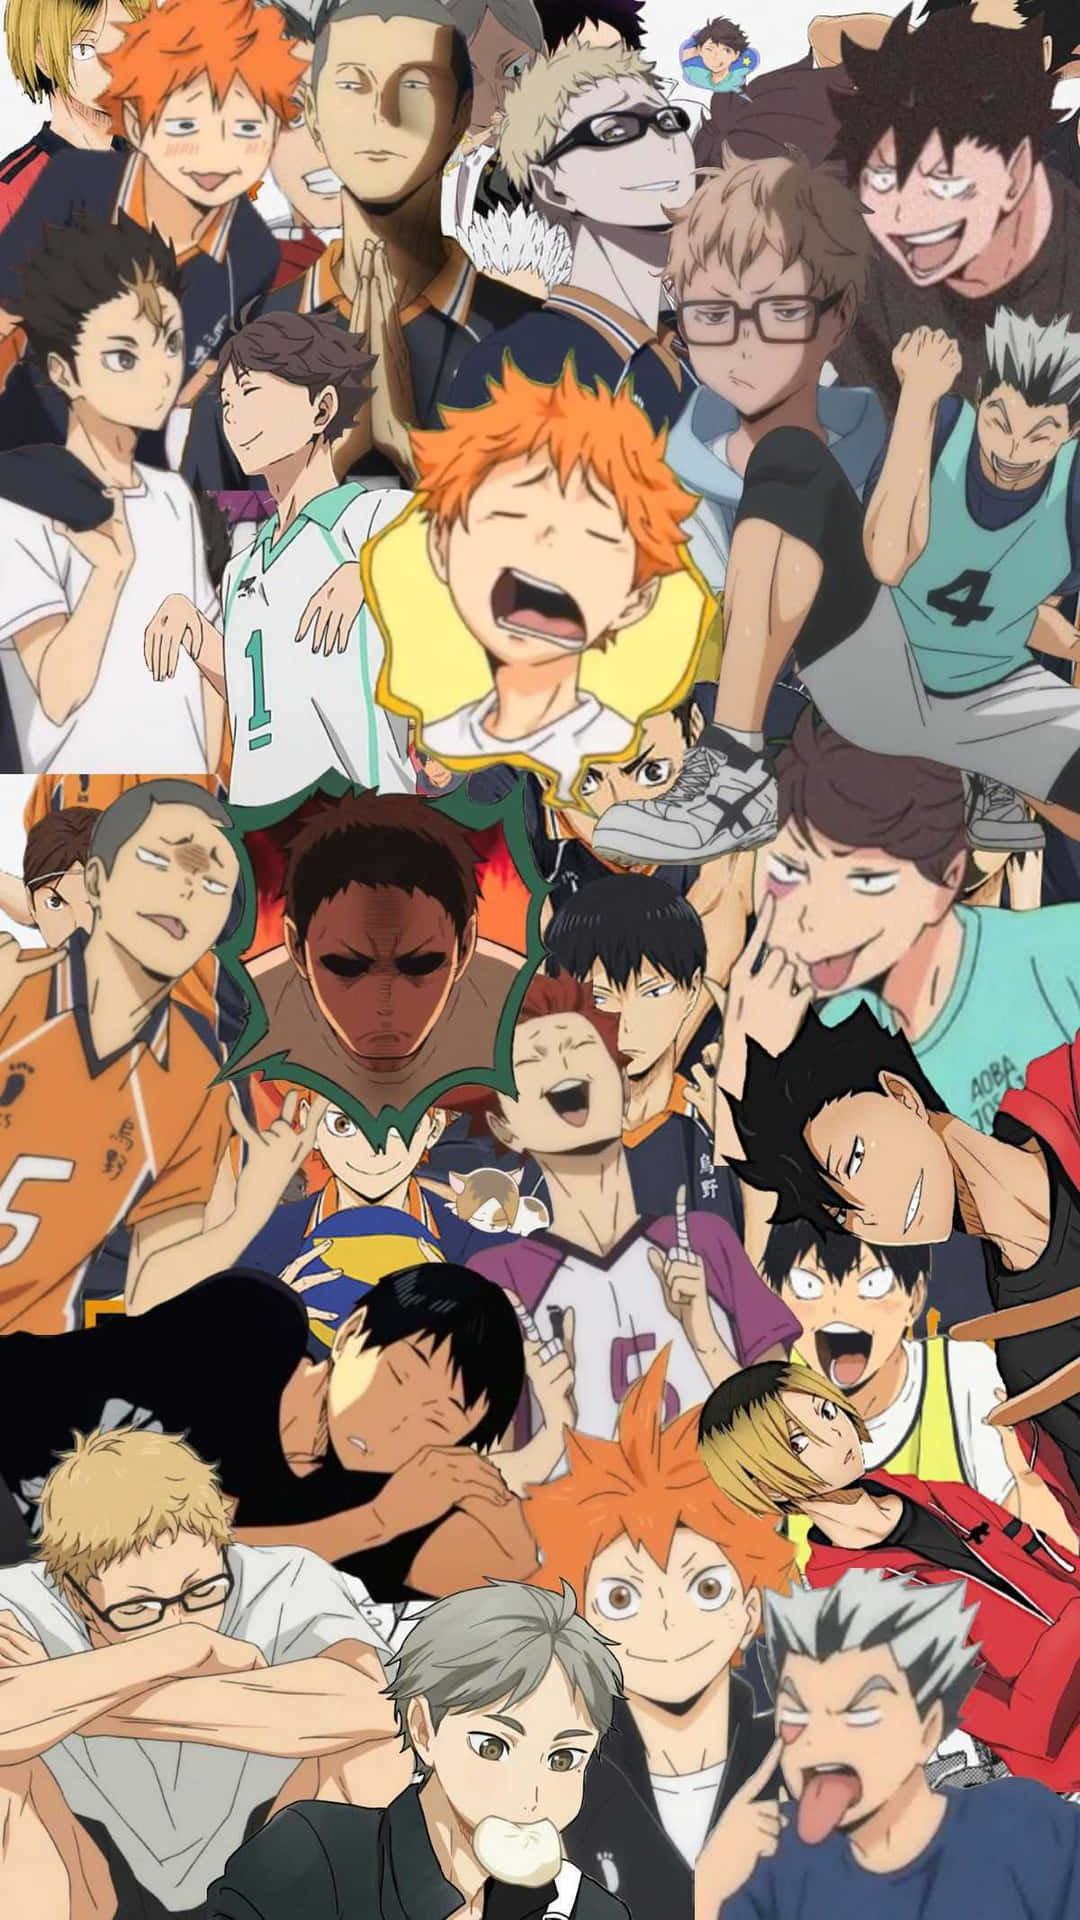 Aesthetic Desktop Background in the Style of Haikyuu Wallpaper